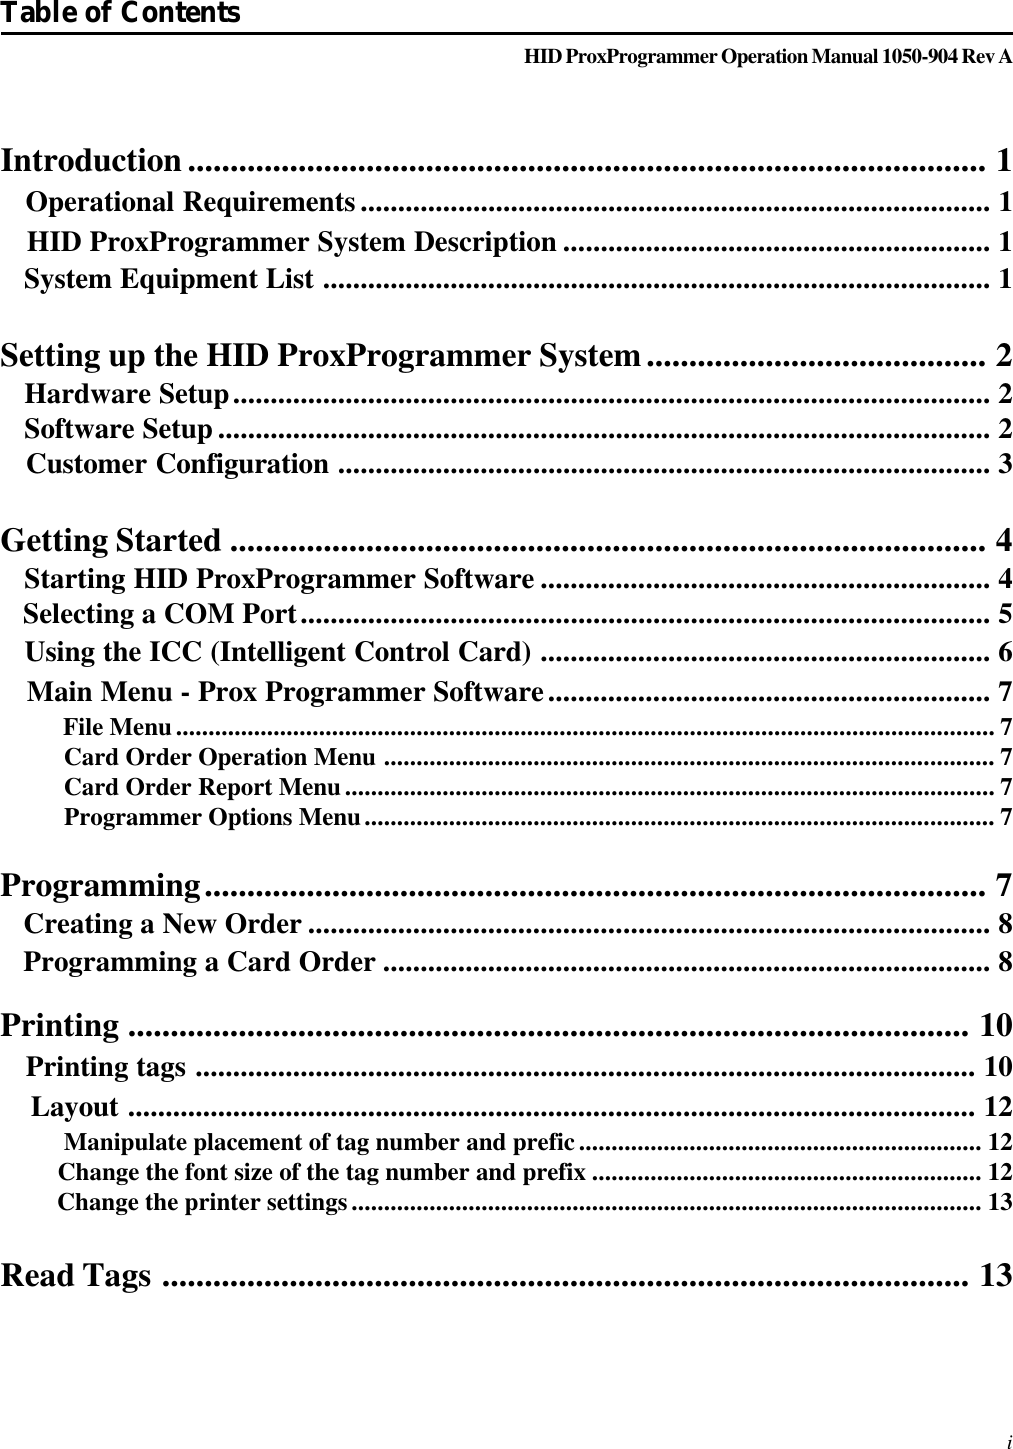 HID ProxProgrammer Operation Manual 1050-904 Rev AIntroduction .............................................................................................. 1   Operational Requirements .................................................................................... 1   HID ProxProgrammer System Description ......................................................... 1   System Equipment List ......................................................................................... 1Setting up the HID ProxProgrammer System........................................ 2   Hardware Setup..................................................................................................... 2   Software Setup ....................................................................................................... 2   Customer Configuration ....................................................................................... 3Getting Started ......................................................................................... 4   Starting HID ProxProgrammer Software ............................................................ 4   Selecting a COM Port............................................................................................ 5   Using the ICC (Intelligent Control Card) ............................................................ 6   Main Menu - Prox Programmer Software........................................................... 7          File Menu.............................................................................................................................. 7          Card Order Operation Menu .............................................................................................. 7          Card Order Report Menu.................................................................................................... 7          Programmer Options Menu................................................................................................. 7Programming............................................................................................ 7   Creating a New Order ........................................................................................... 8   Programming a Card Order ................................................................................. 8Printing ................................................................................................... 10   Printing tags ........................................................................................................ 10    Layout ................................................................................................................. 12          Manipulate placement of tag number and prefic.............................................................. 12         Change the font size of the tag number and prefix ............................................................ 12         Change the printer settings................................................................................................. 13Read Tags ............................................................................................... 13Table of Contents i